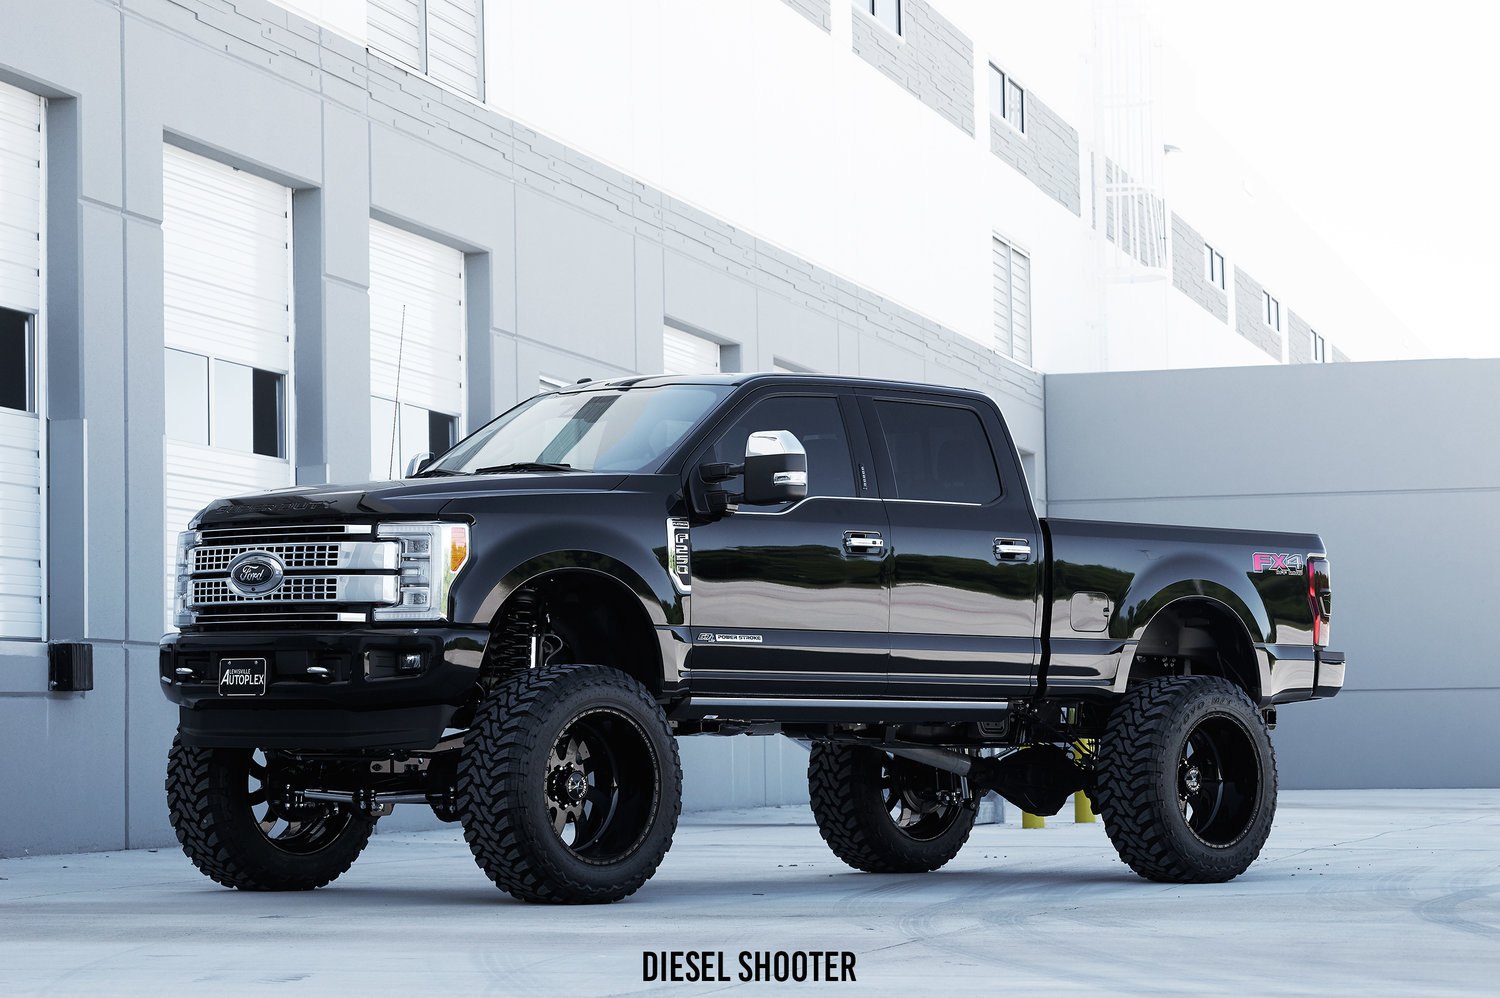 Black Ford F-250 with Off-road Toyo Tires - Photo by Diesel Shooter